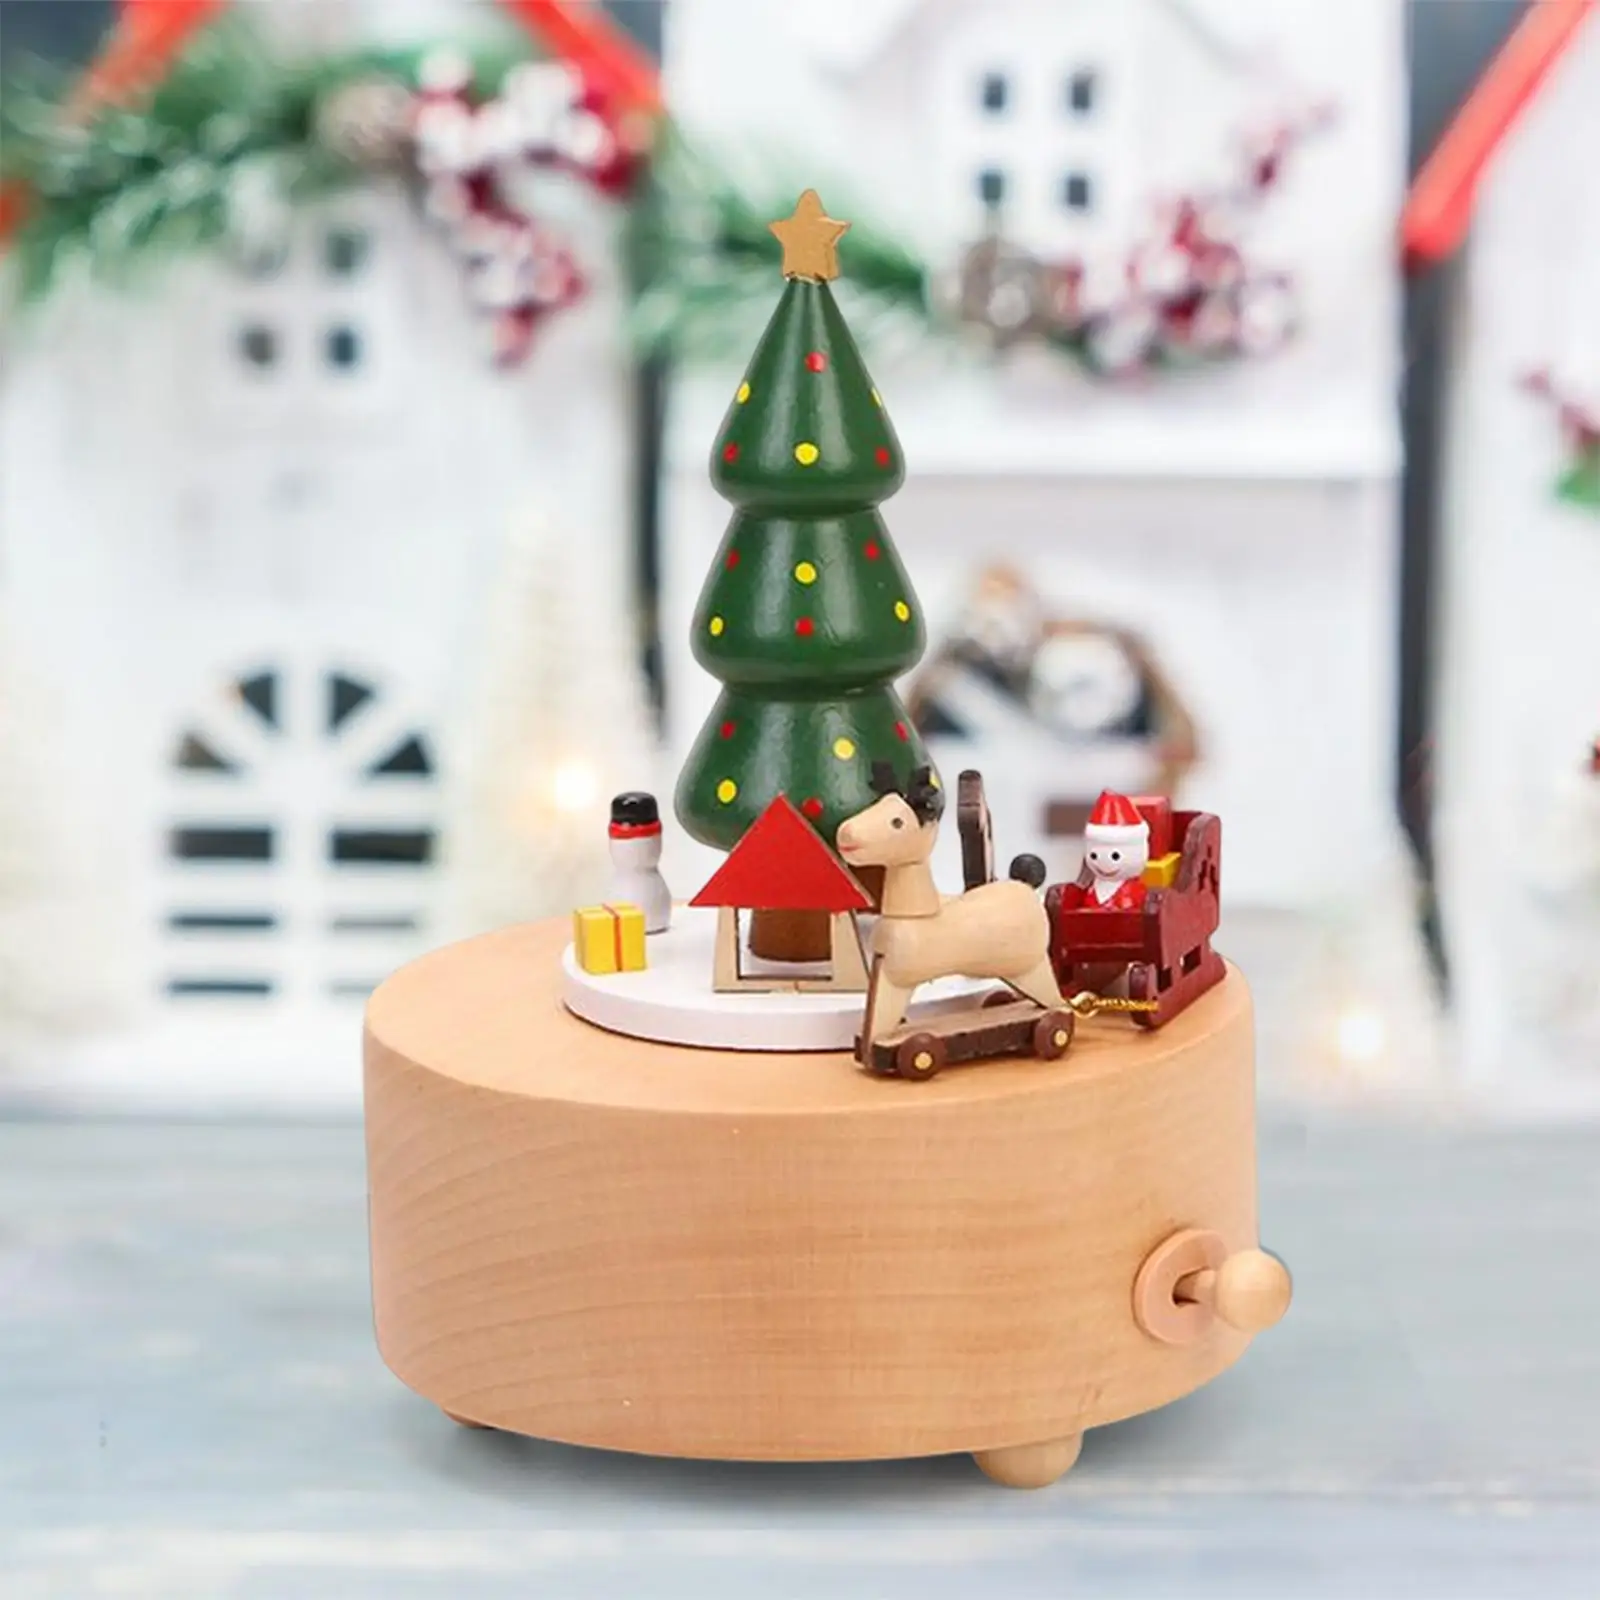 Creative Christmas Music Box Rotating Wood Musical Box Carousel Toy Crafts for Party Indoor Decor Kids Gift Ornament